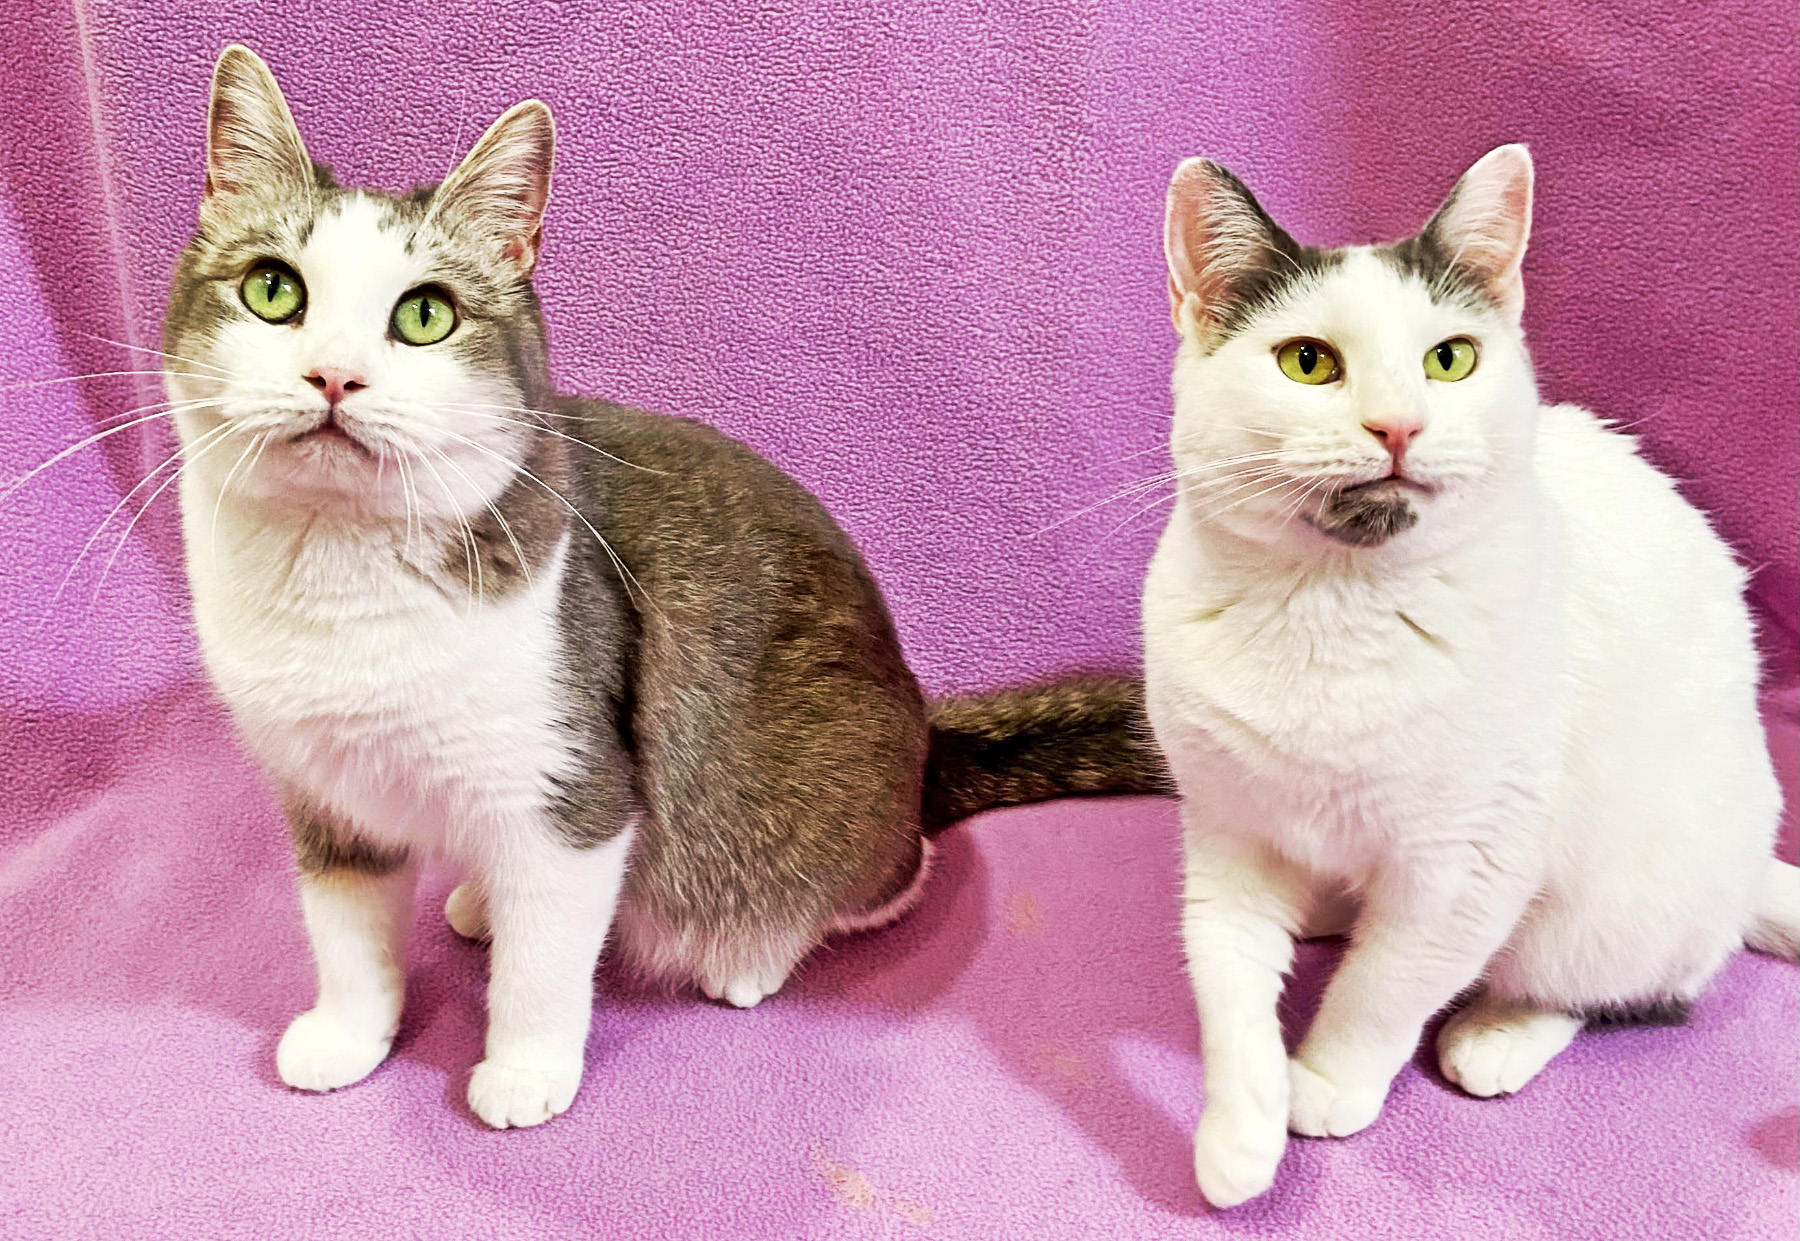 Happy Cats Haven – Pet of the Week: Hello, we’re Bonnie and Nina, bonded BFFs looking for our furever family together. Bonnie is the adorable gray tabby and white gal with soulful yellow-green eyes. And I’m Nina, a tiny gray and white girl with expressive yellow eyes lined in eyeliner. We were brought to Happy Cats when our human could no longer care for us. Despite some tough times, though, we love to play, especially with wand toys! When playtime is over, it’s nap time and you’ll find us cuddling together! We’ll do best in a quiet home without other pets or kids. Our adoption fees together are $120 with the Friends and Family discount, sponsored by Petco Love. That includes our spays, vaccinations, microchips, food and litter starter kits and a free well-kitty checkup each. Happy Cats Haven: 719-362-4600, 327 Manitou Ave. Adoptions by appointment only until further notice.www.HappyCatsHaven.org, www.Facebook.com/HappyCatsHaven.